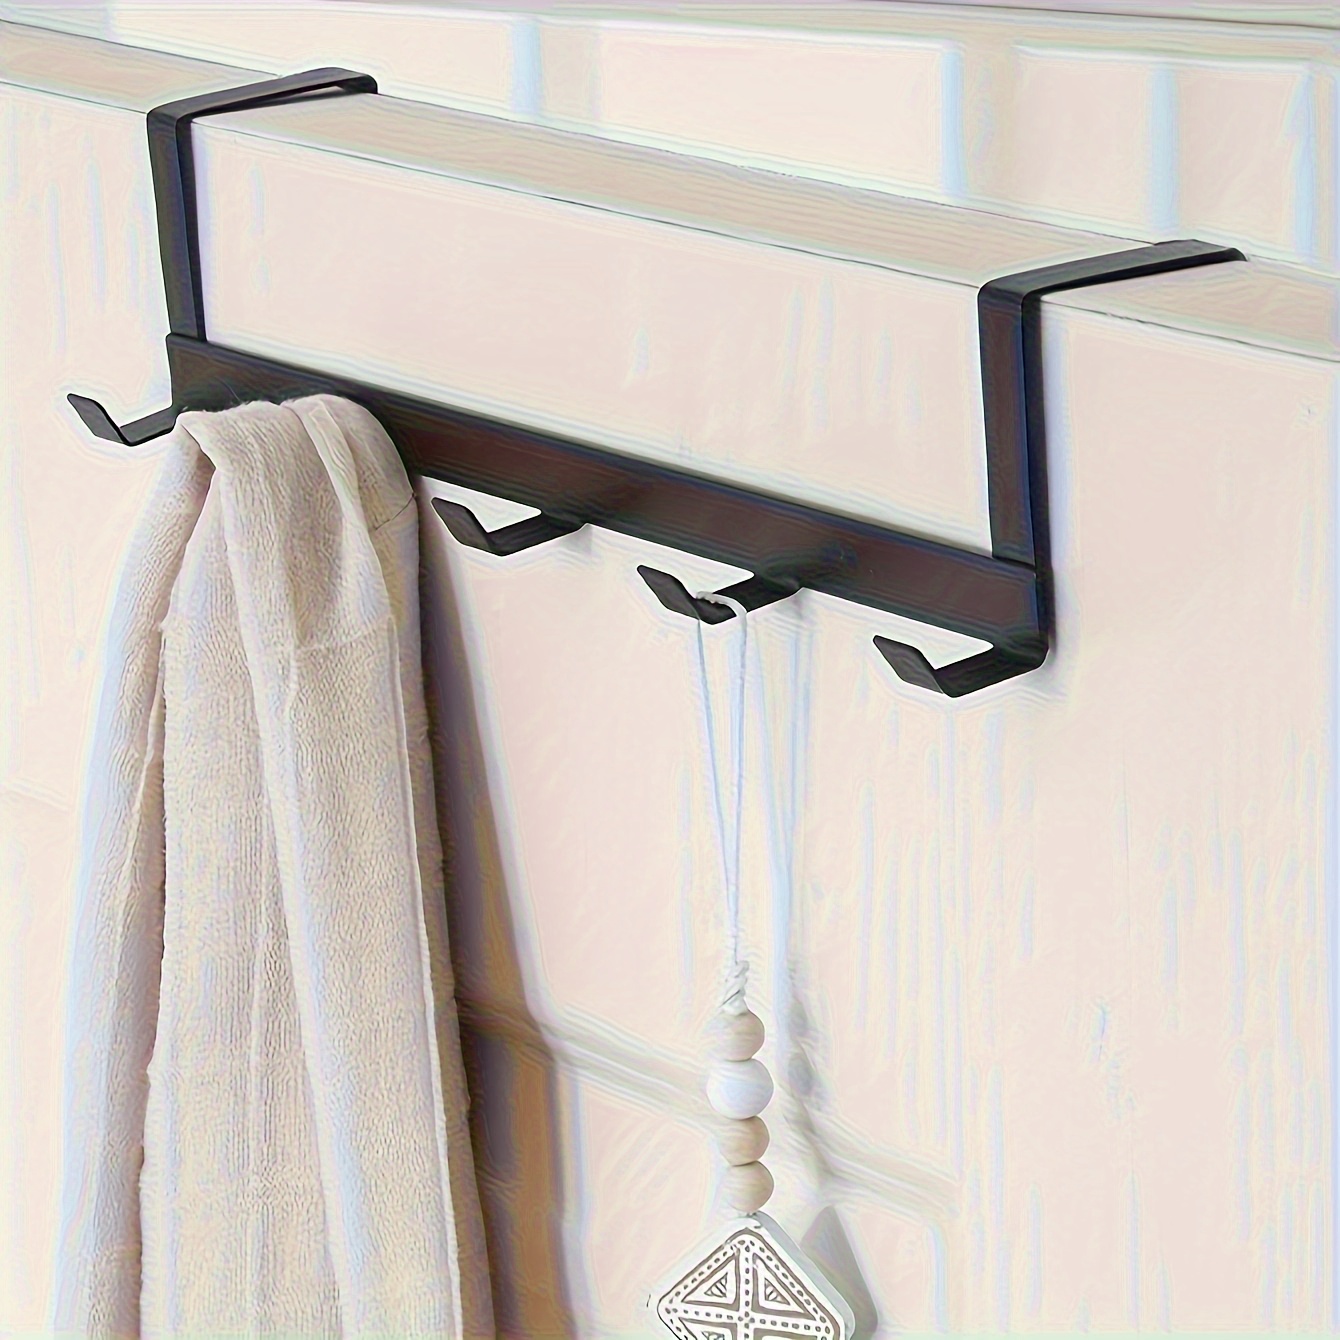 

Easy-install Over-the-door 5-hook Rack - No-drill Iron Coat & Towel Hanger, Space-saving Storage Organizer For Home Hanger Space Saver